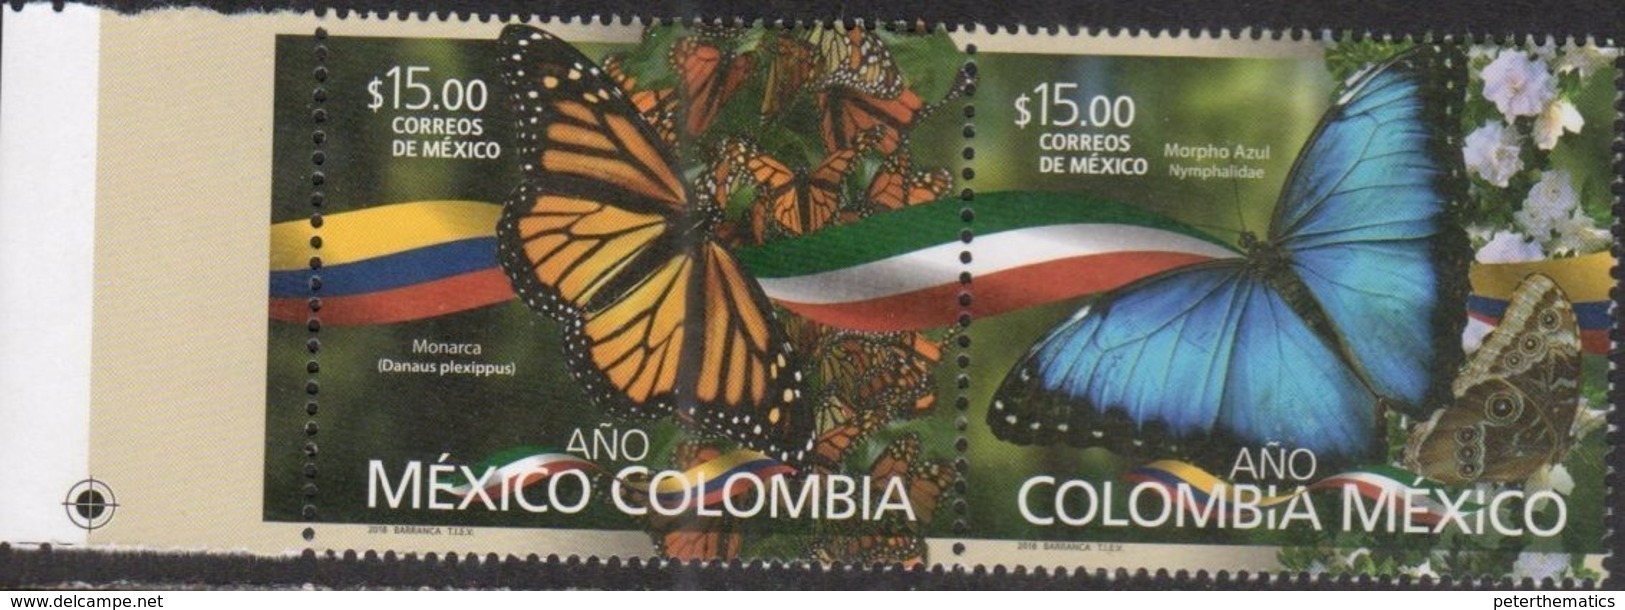 MEXICO, 2018, MNH, MEXICO COLOMBIA YEAR, BUTTERFLIES, JOINT ISSUE, 2v - Vlinders